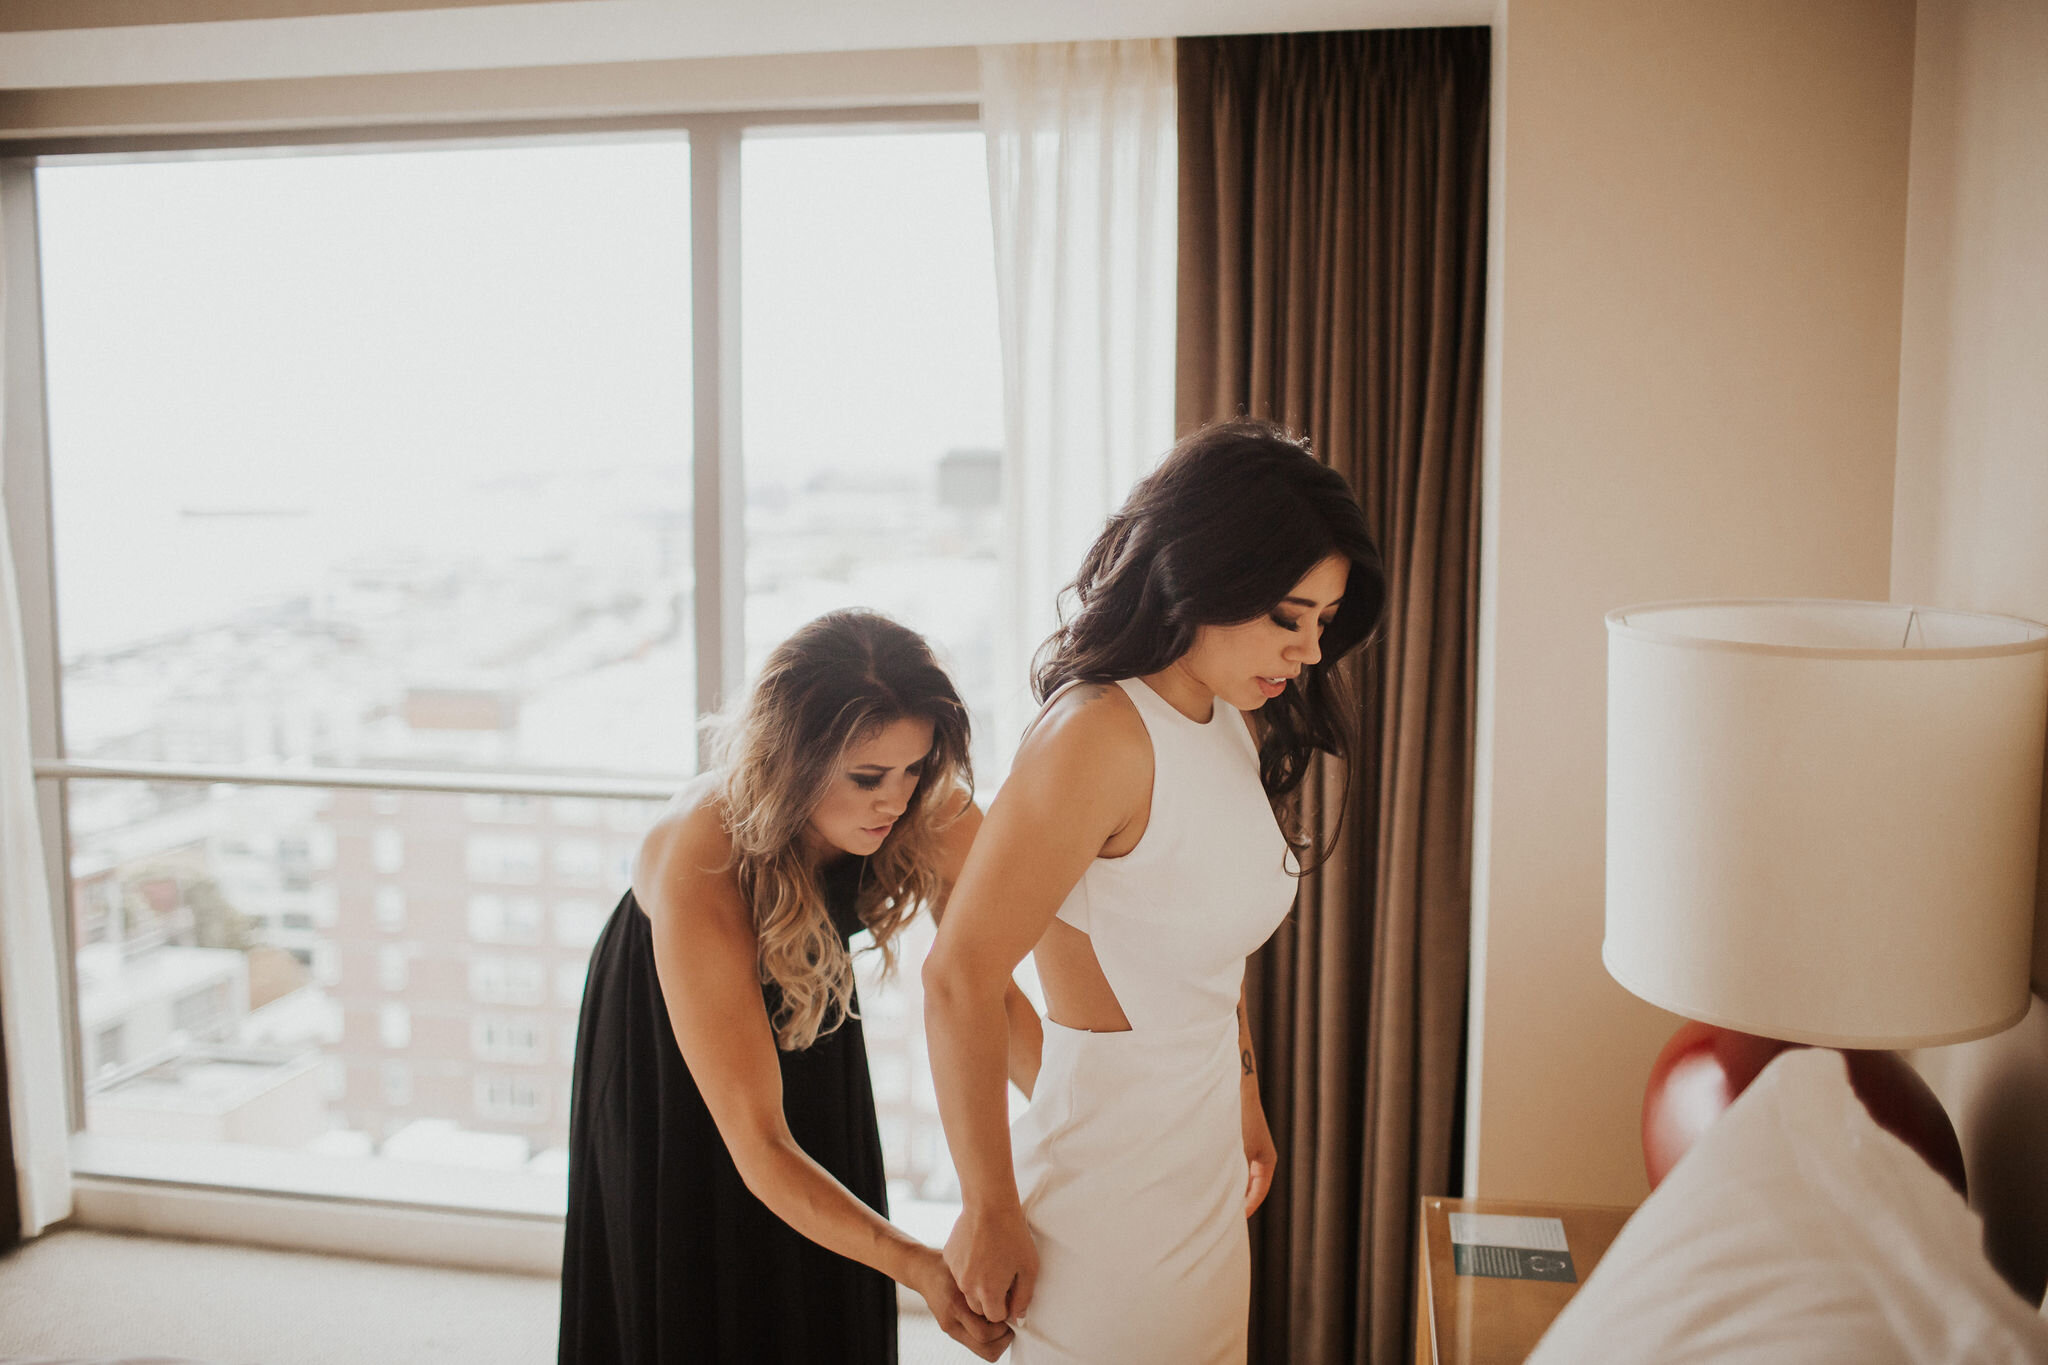 Sykes-getting-ready-august-muse-images-seattle-wedding-photographer-within-sodo-four-seasons-129.jpg